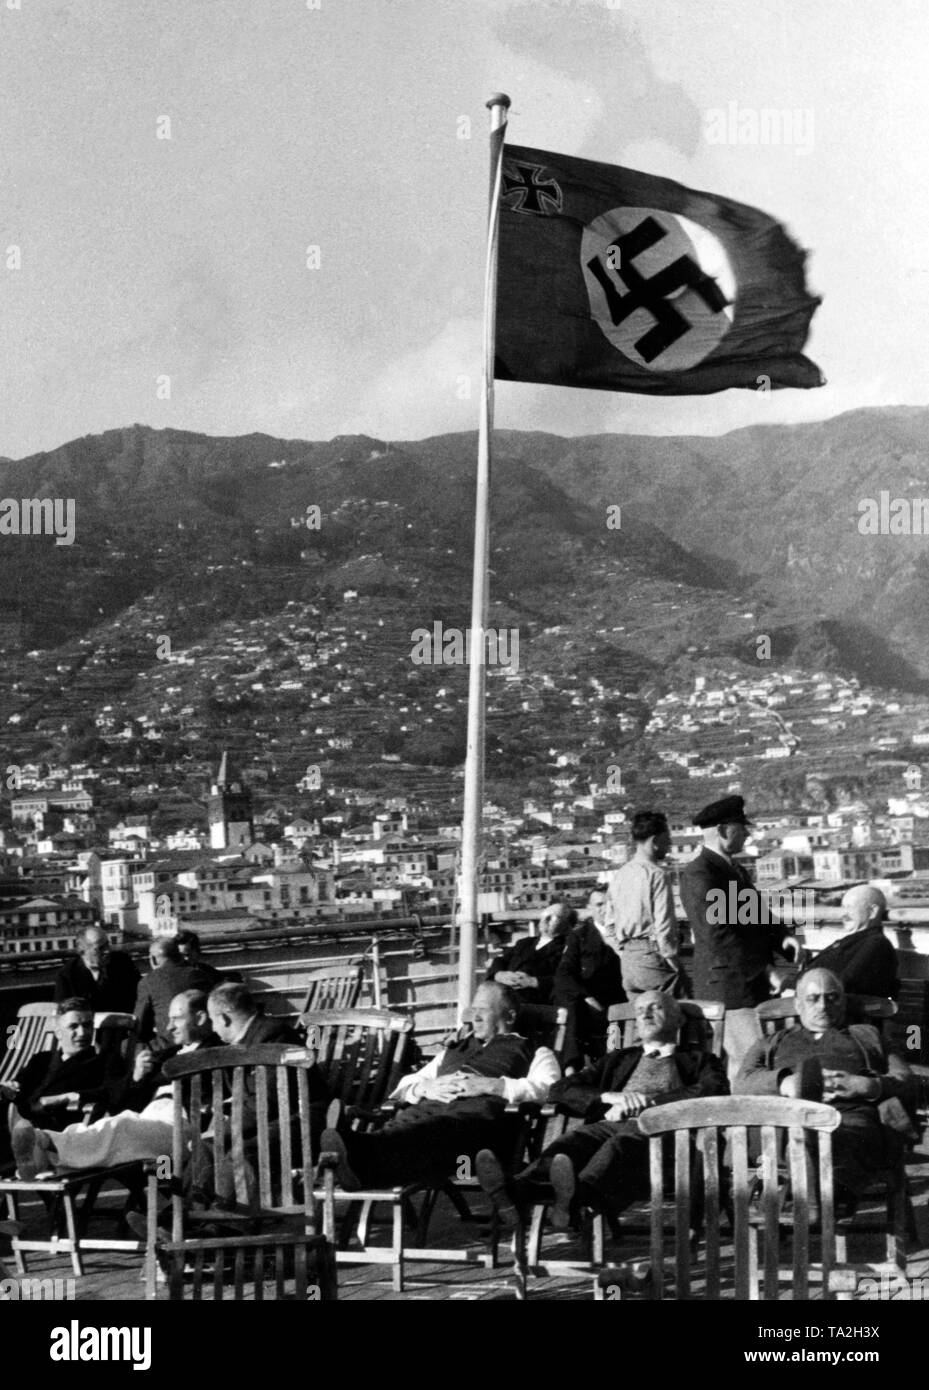 Vacationers of the Nazi organization 'Kraft durch Freude' ('Strength through Joy') are having a midday nap under a swastika flag in the port of Funchal in Madeira. Undated photo. Stock Photo